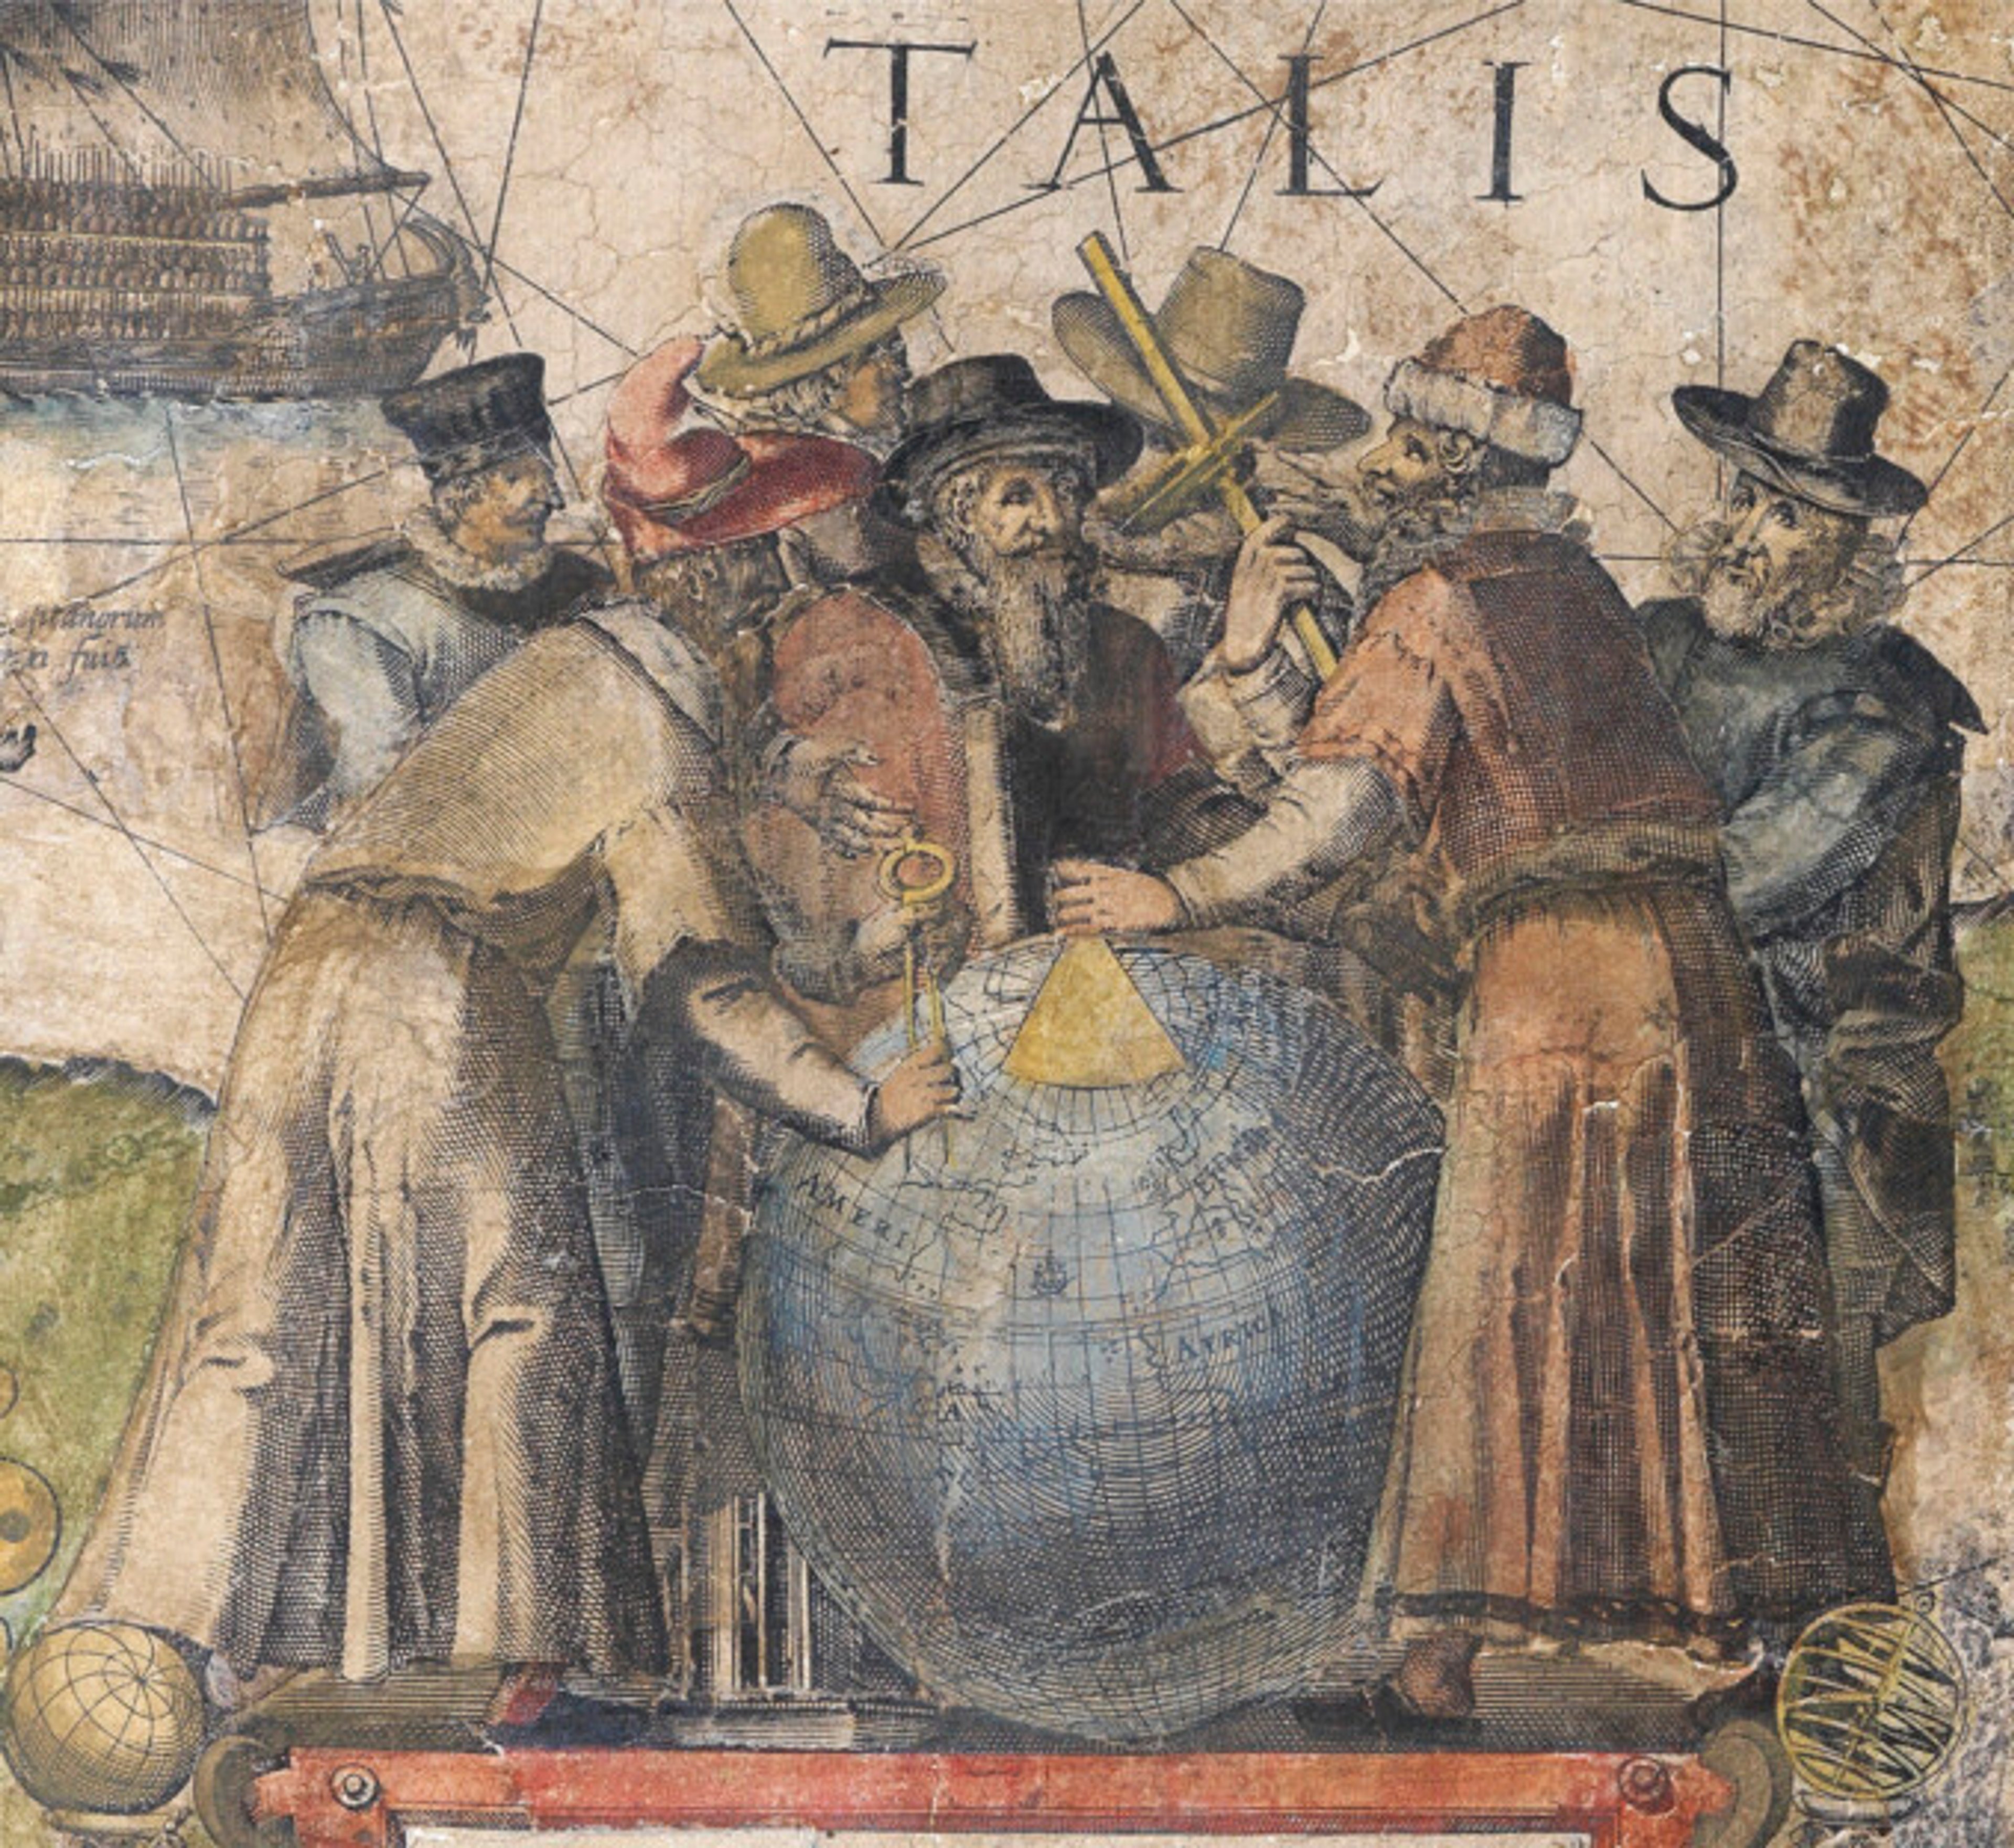 Seven men gathered around a large globe, with the backdrop of a map behind them.